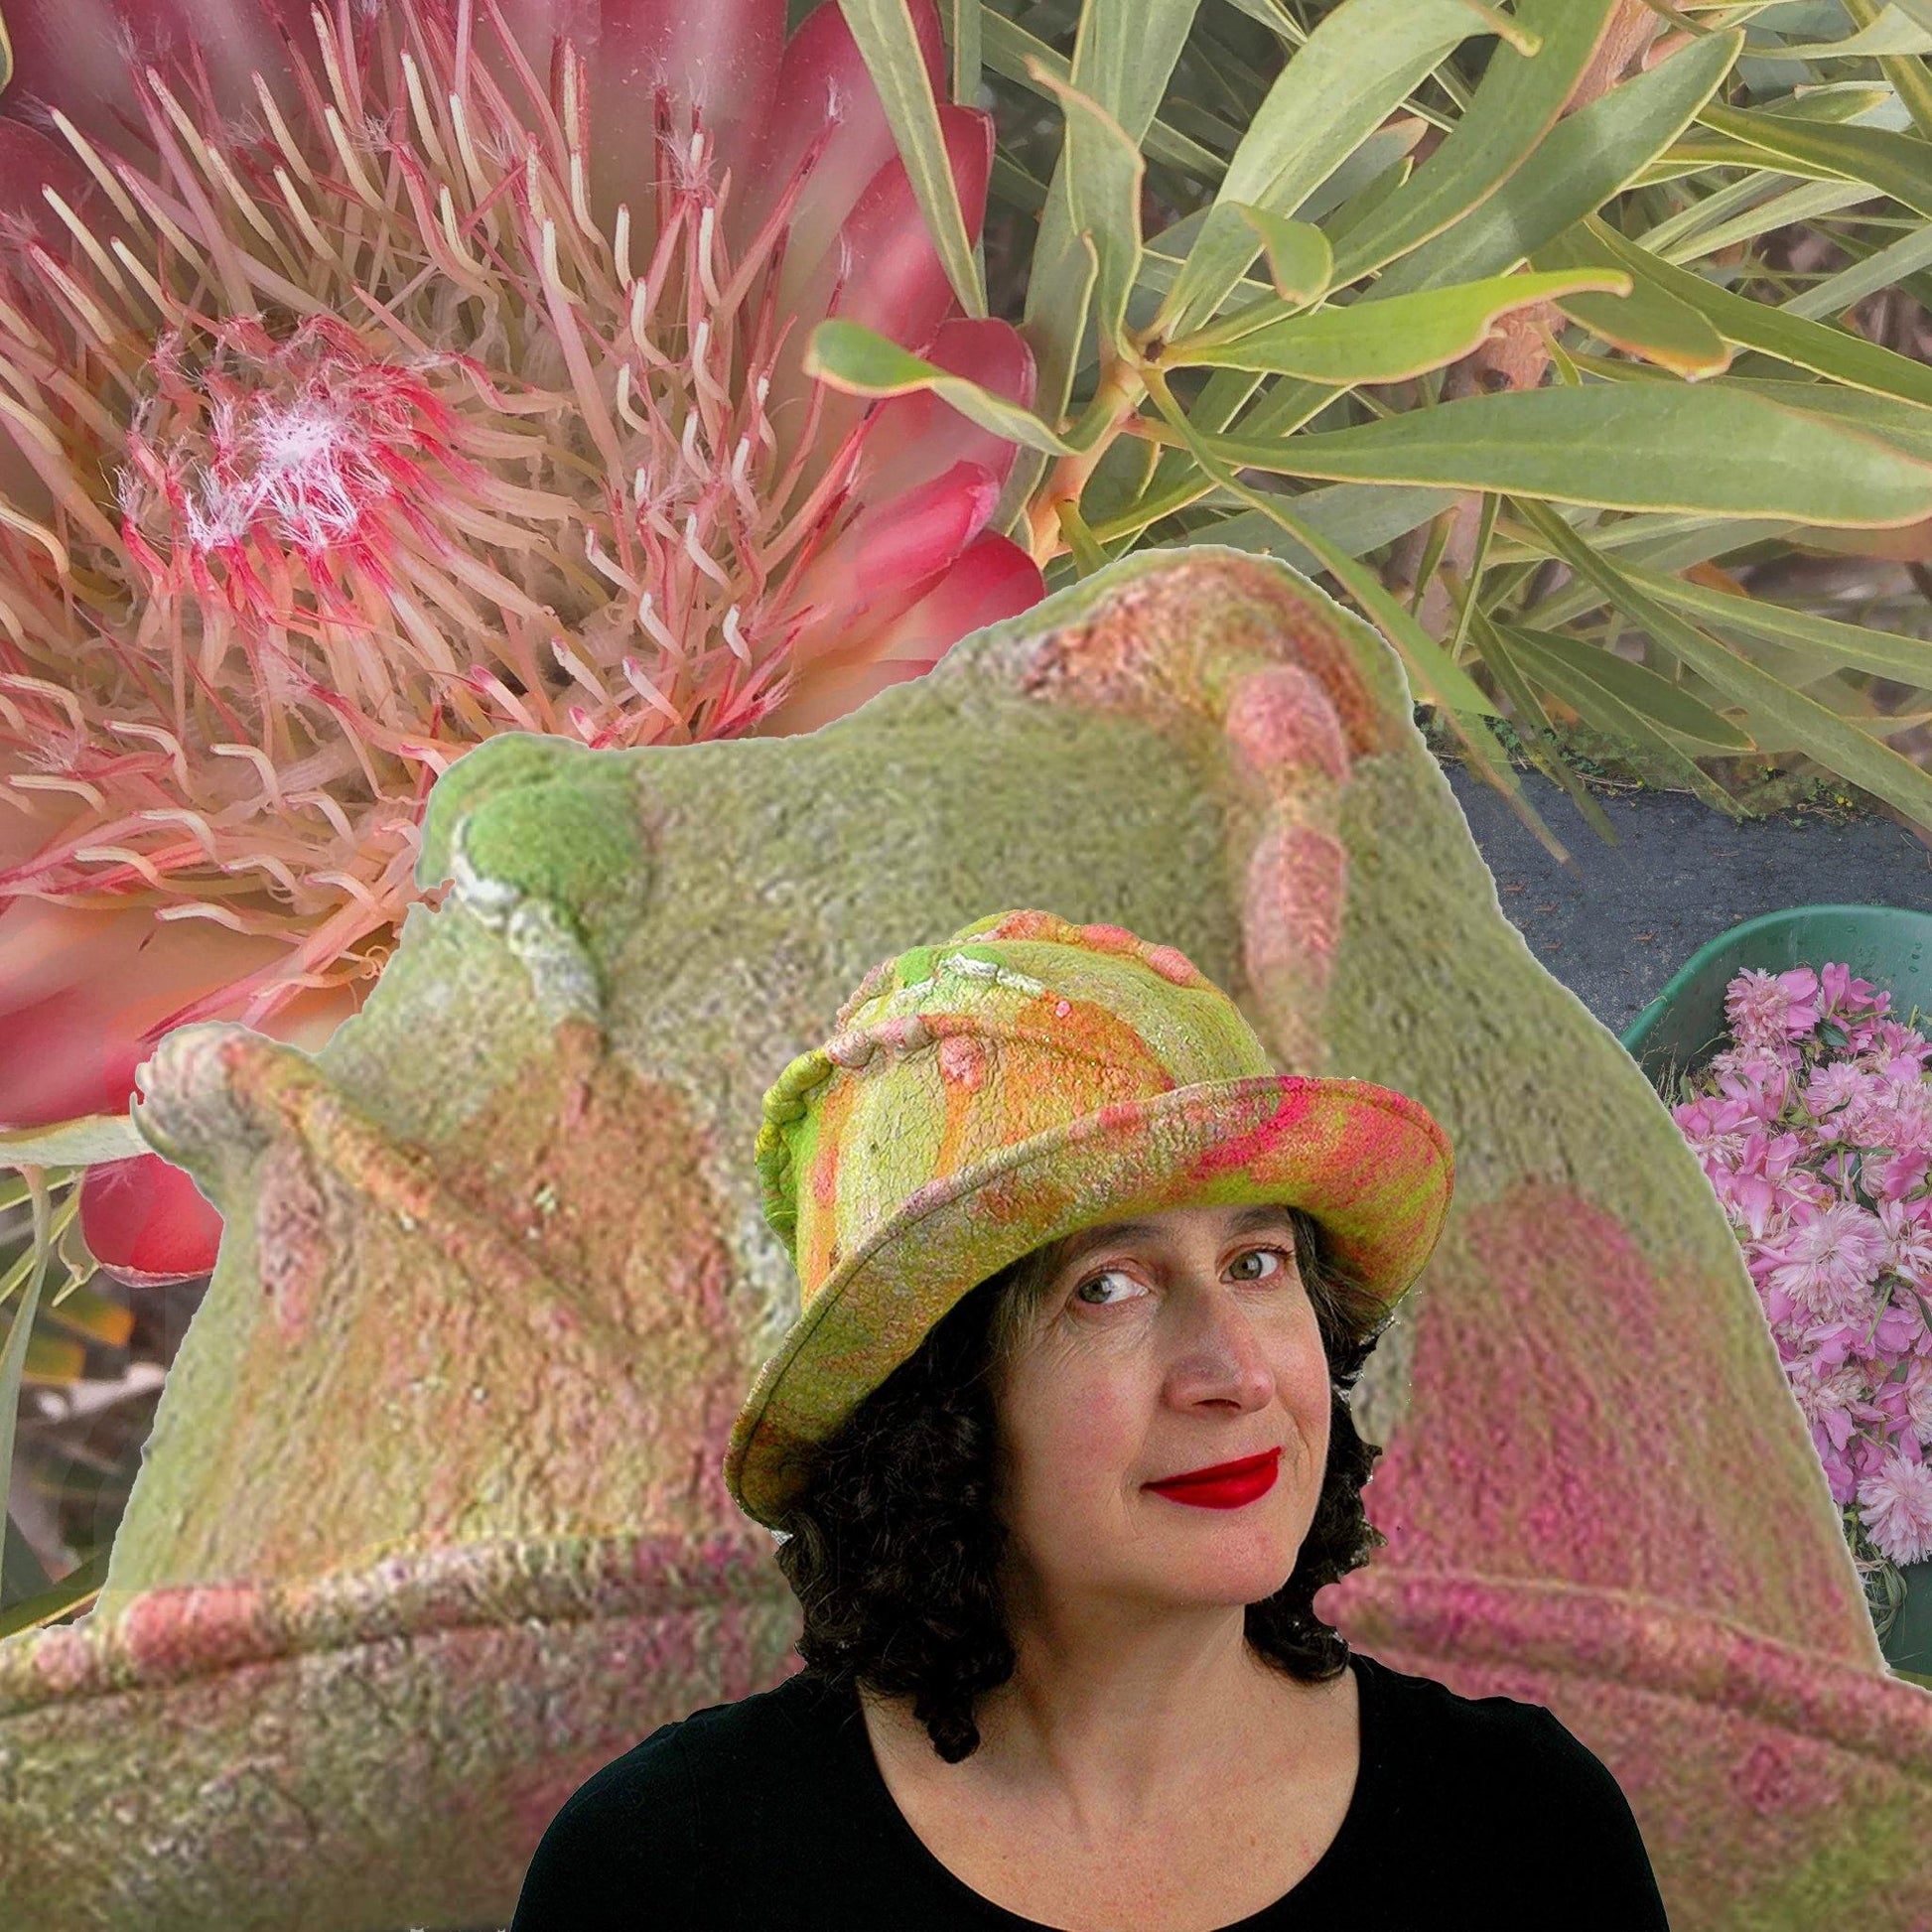 Lime Green and Hot Pink Brimmed Hat set amongst the proteas and peonies.